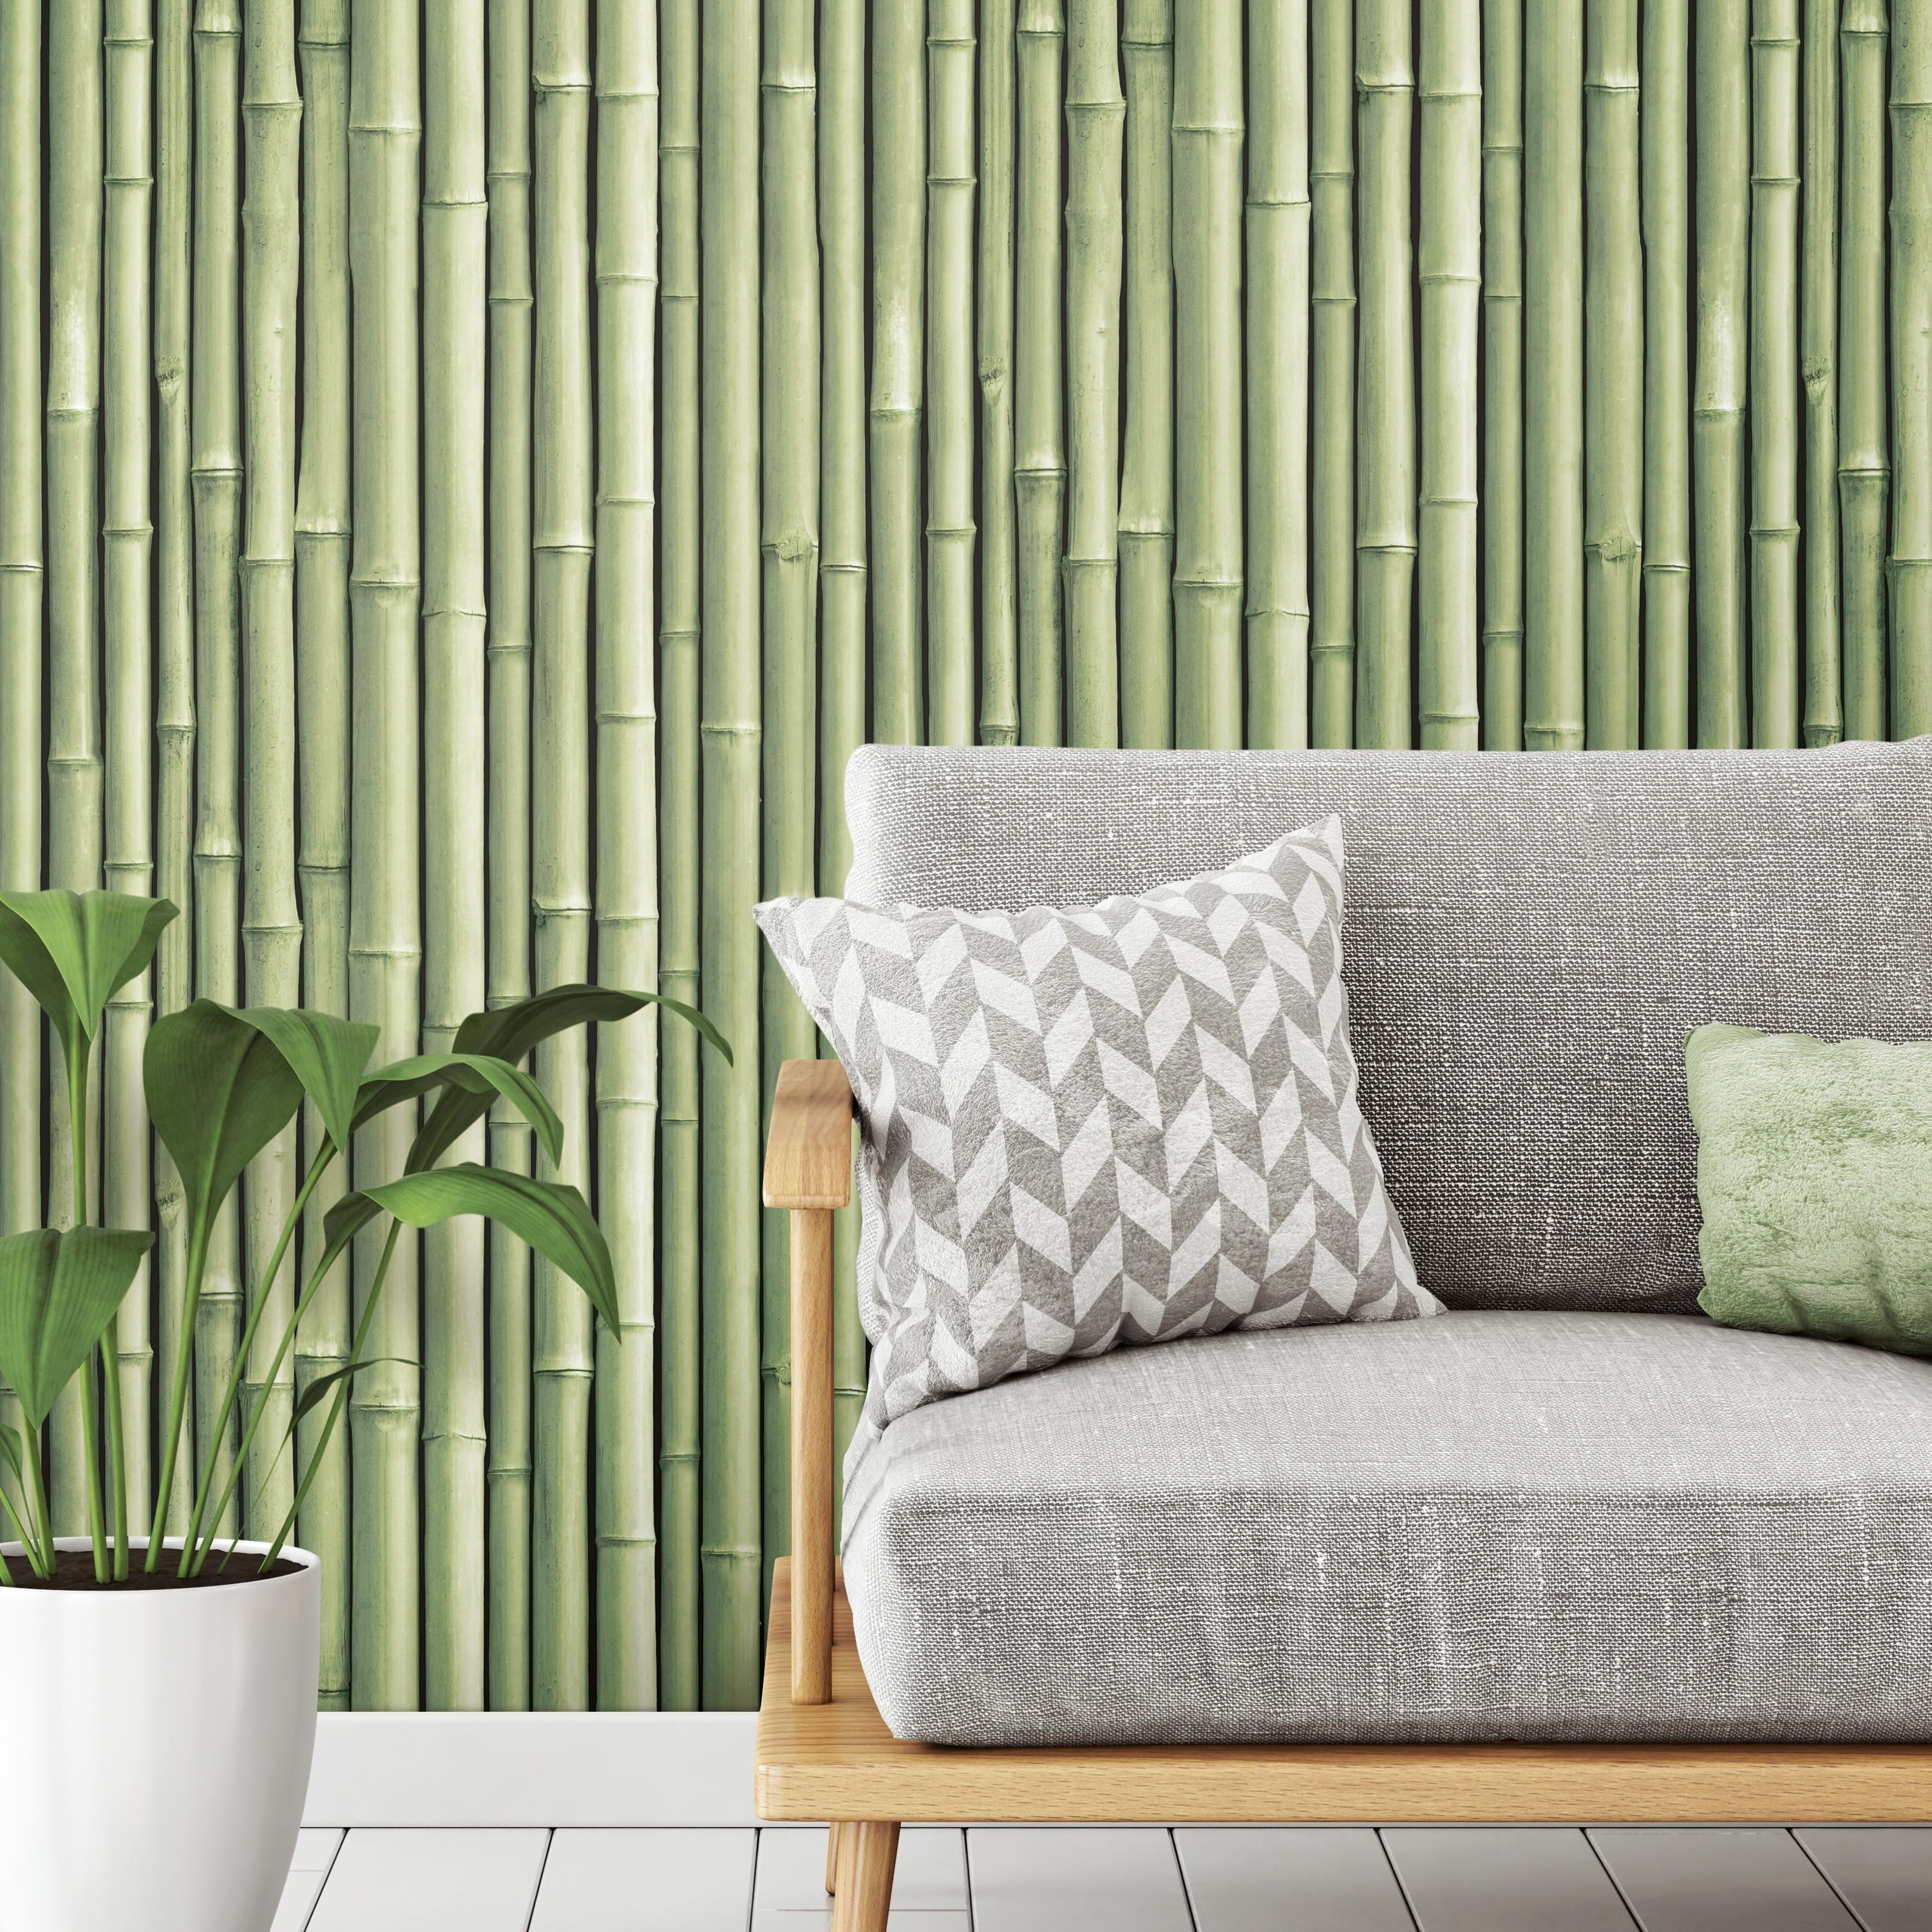 RoomMates Bamboo Green Peel and Stick Wallpaper (Covers 28.18 sq. ft.)  RMK11449WP - The Home Depot